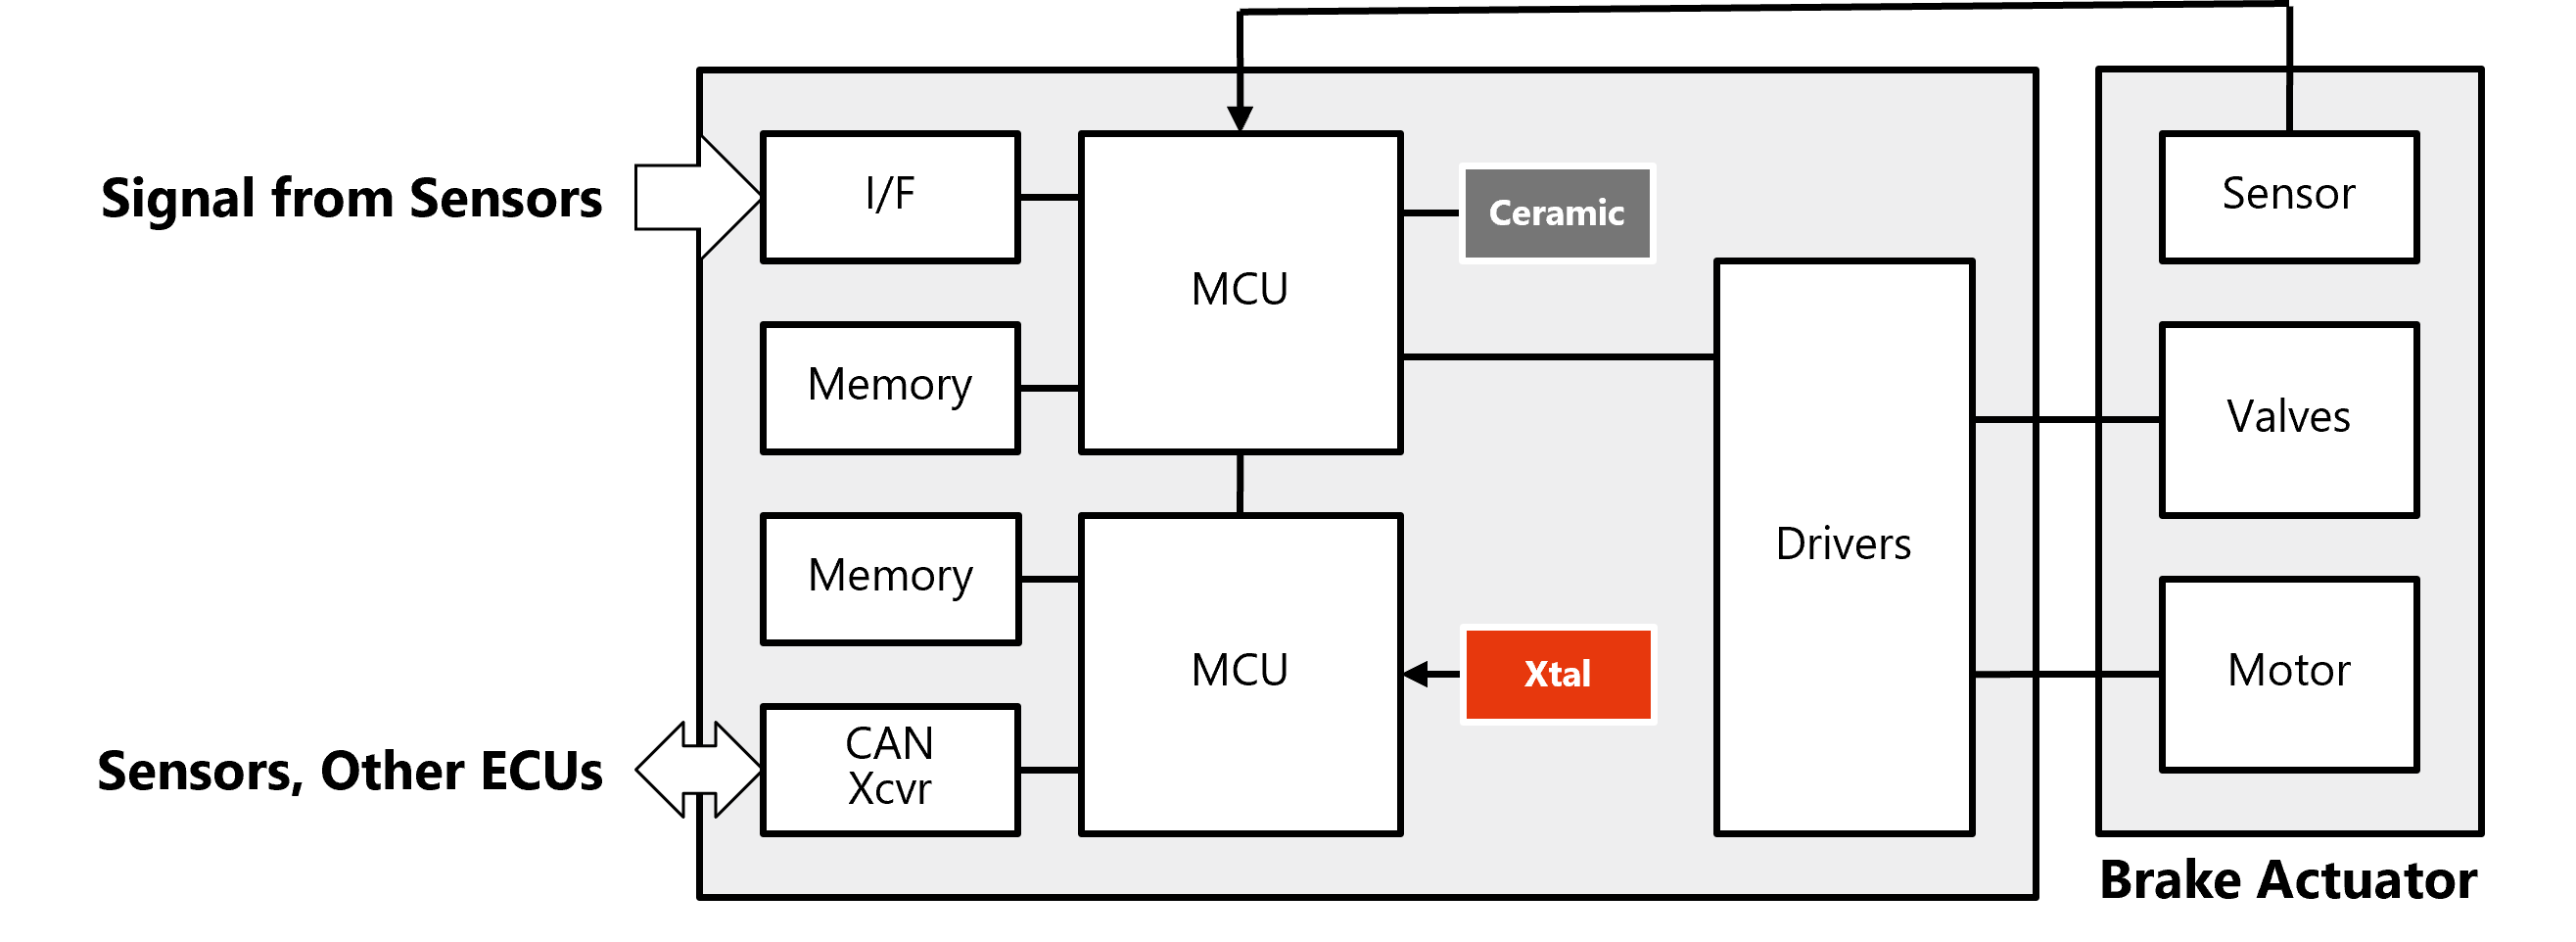 BlockDiagram_Chassis_Safety_ESC.png